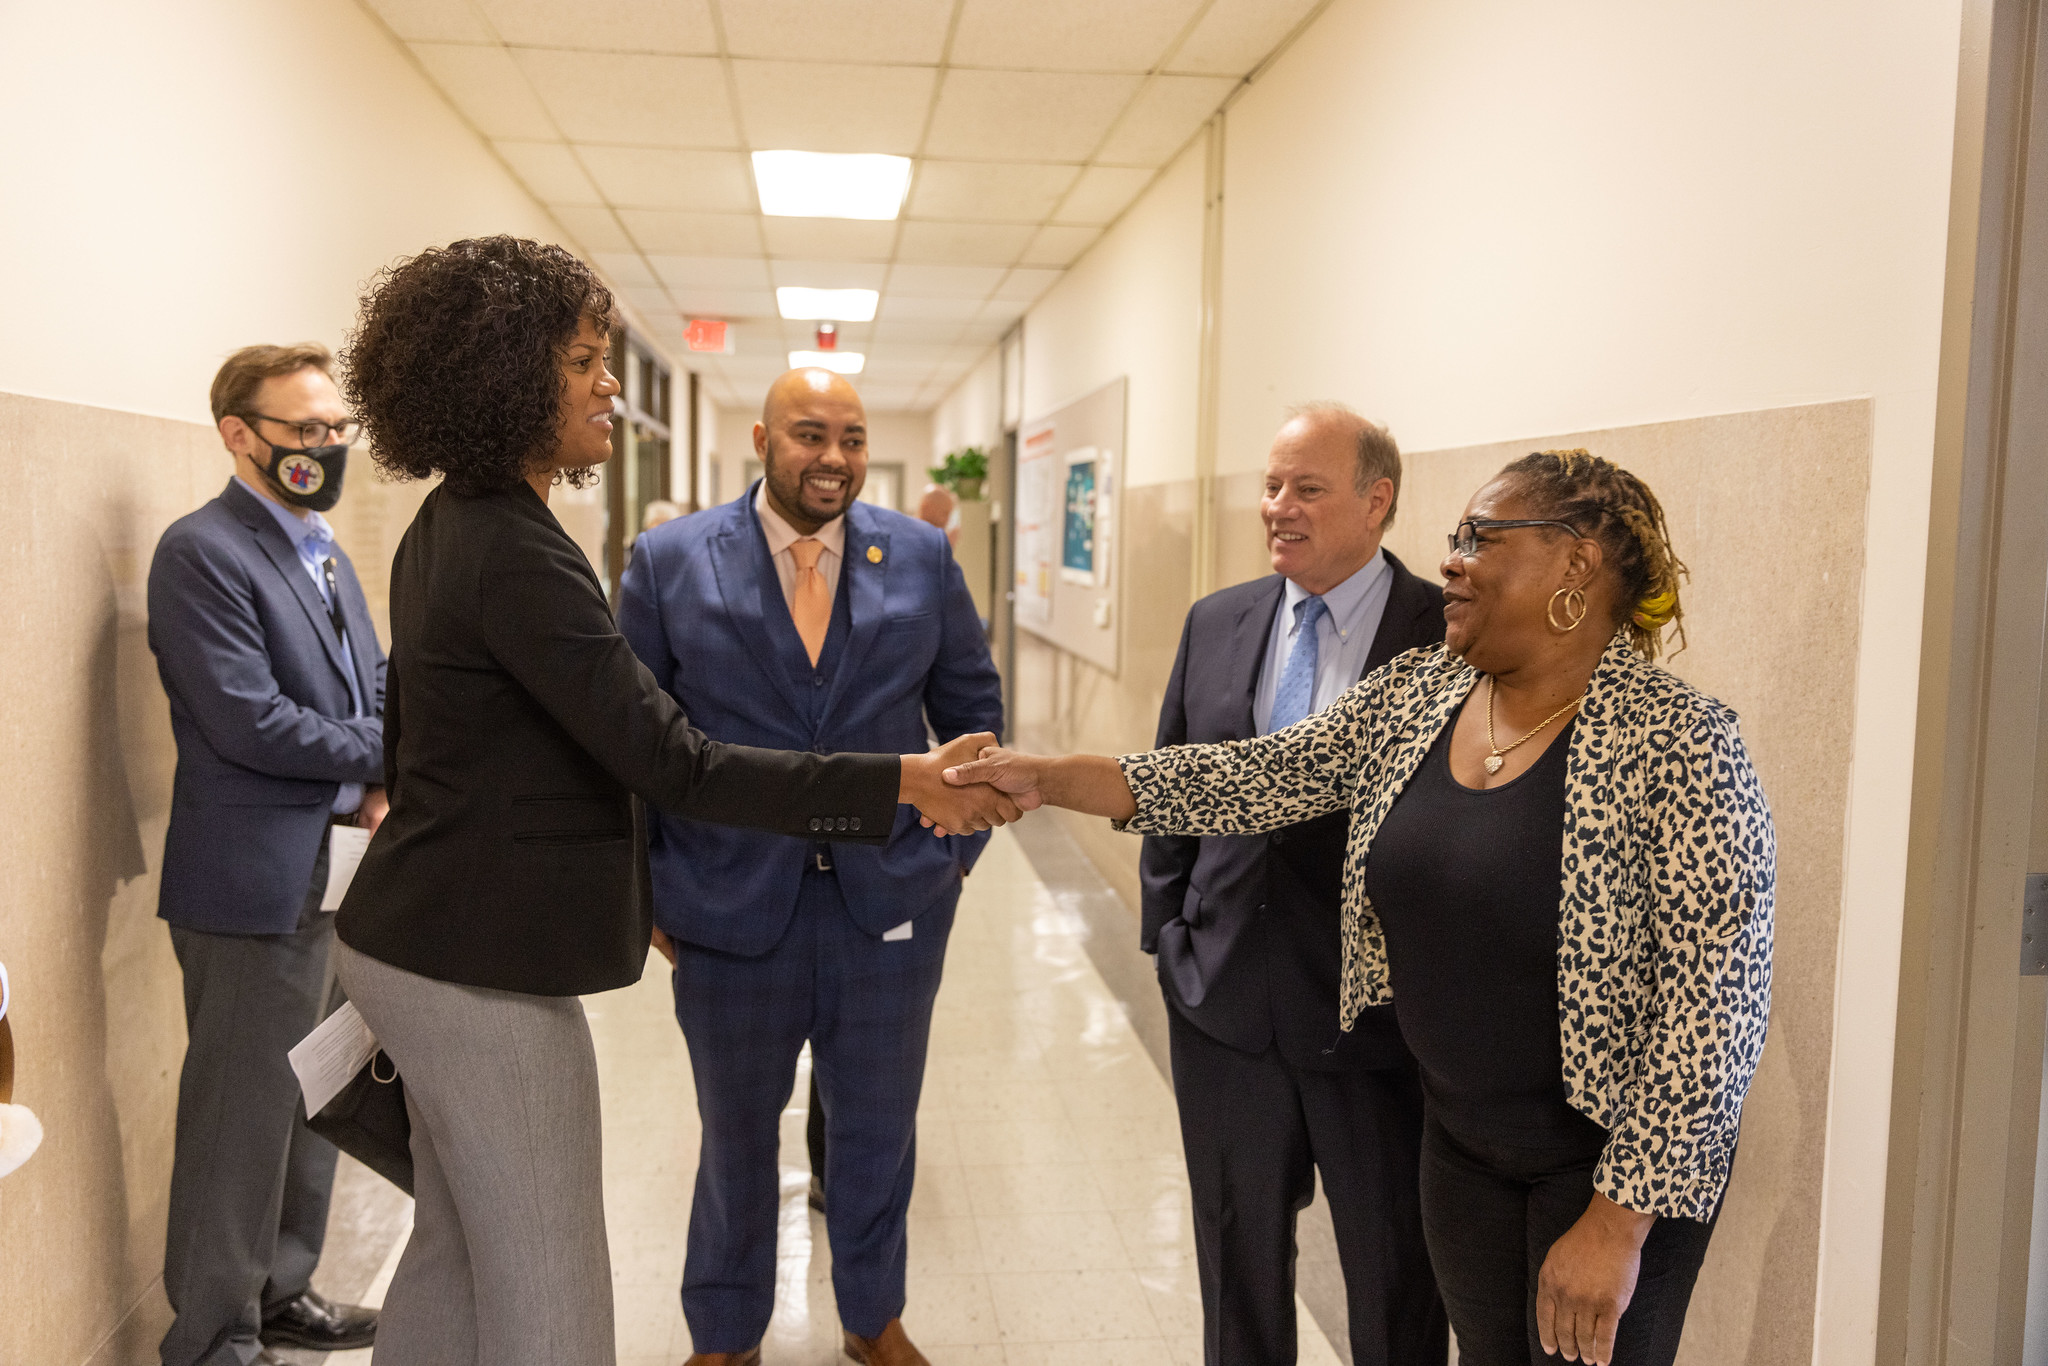 Make it Home participant Barbara Sledge (right) celebrates with Mayor Mike Duggan and Detroit City Council
Members Latisha Johnson and Fred Durhall III after an event announcing the 2022 Make it Home cohort.
Photo: City of Detroit, Flickr.